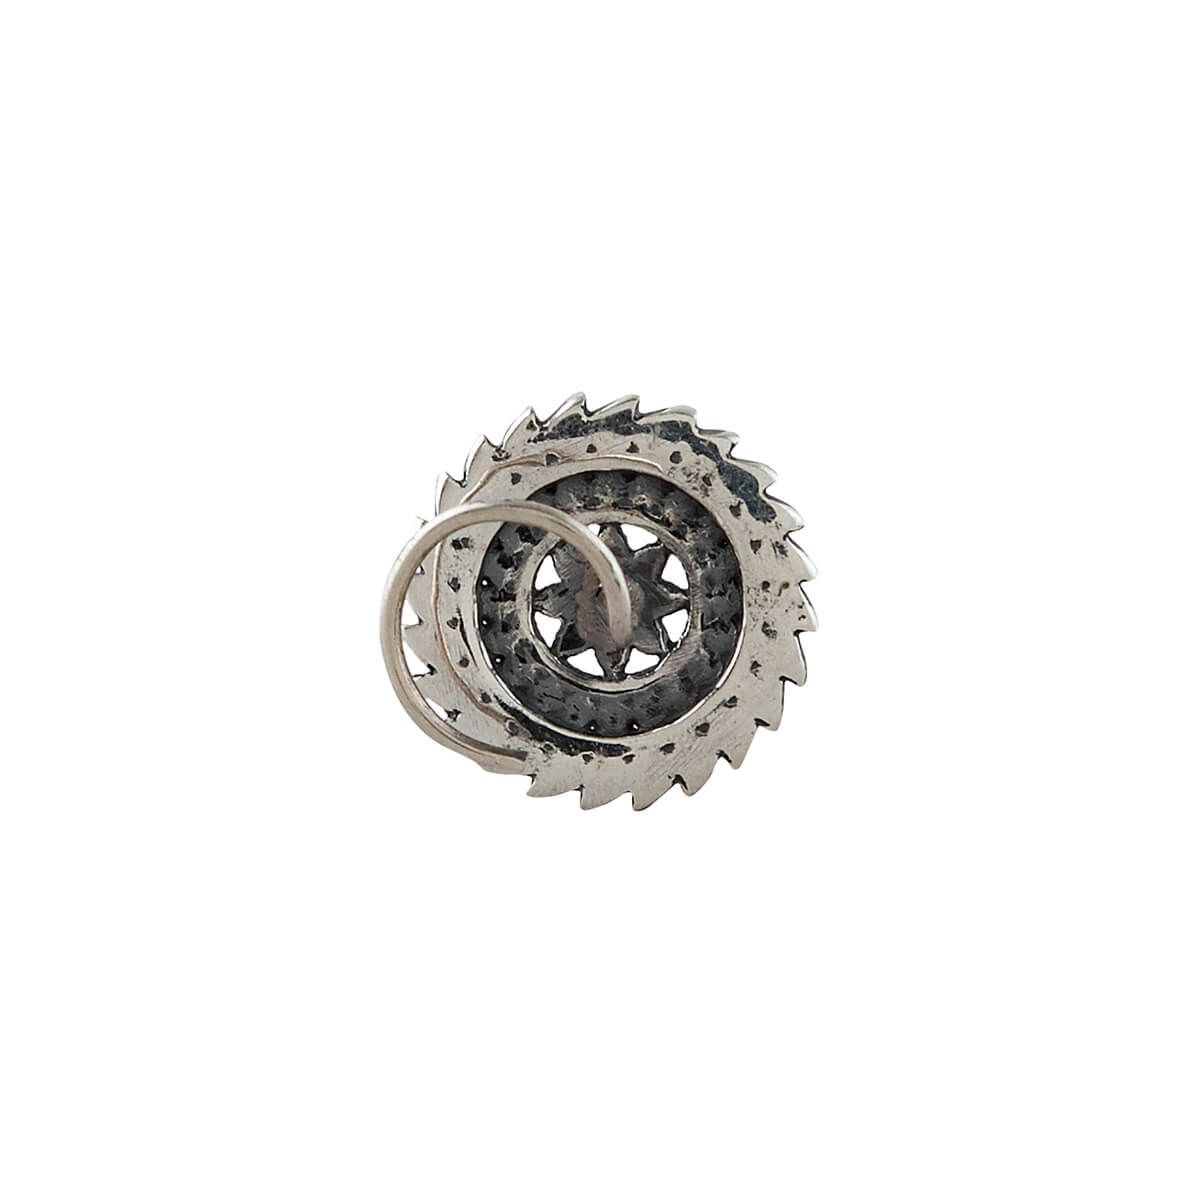 Delicate Floral Circle Silver Nose Pin - Pierced